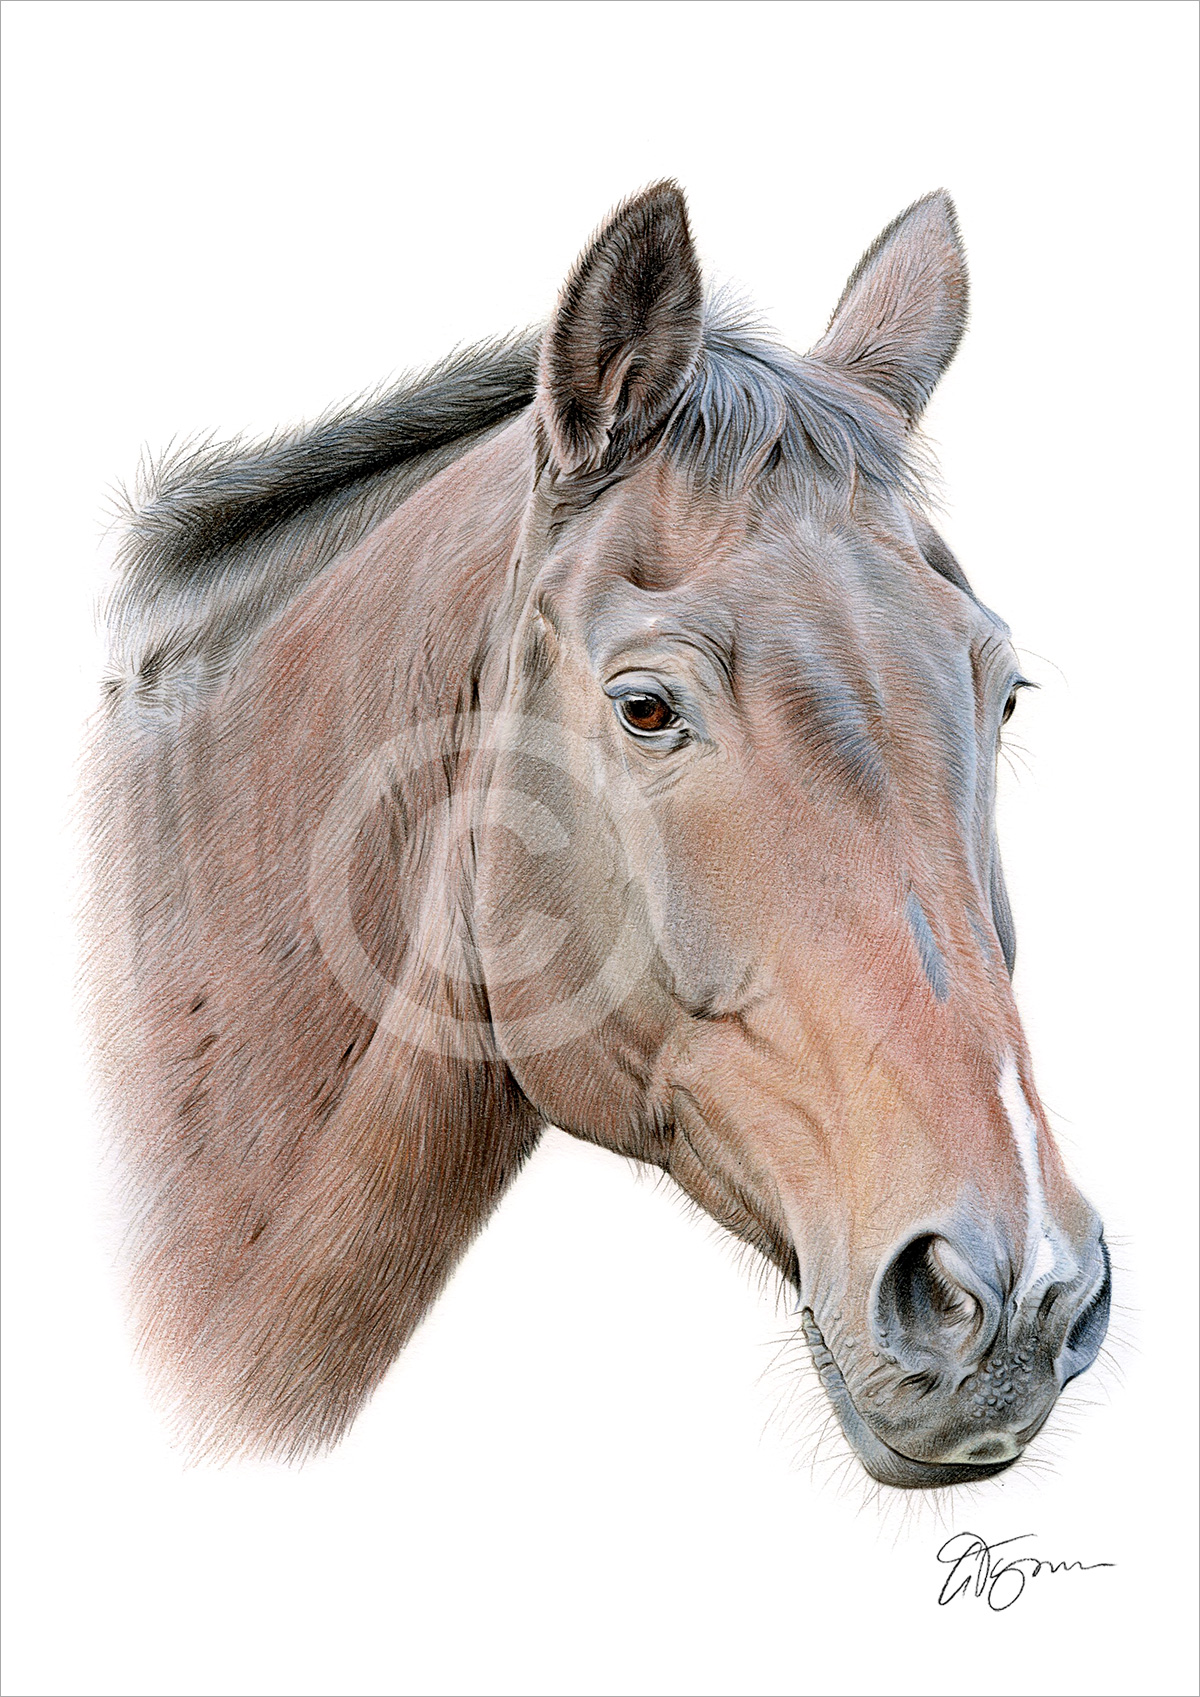 Colour pencil drawing of a brown horse by artist Gary Tymon